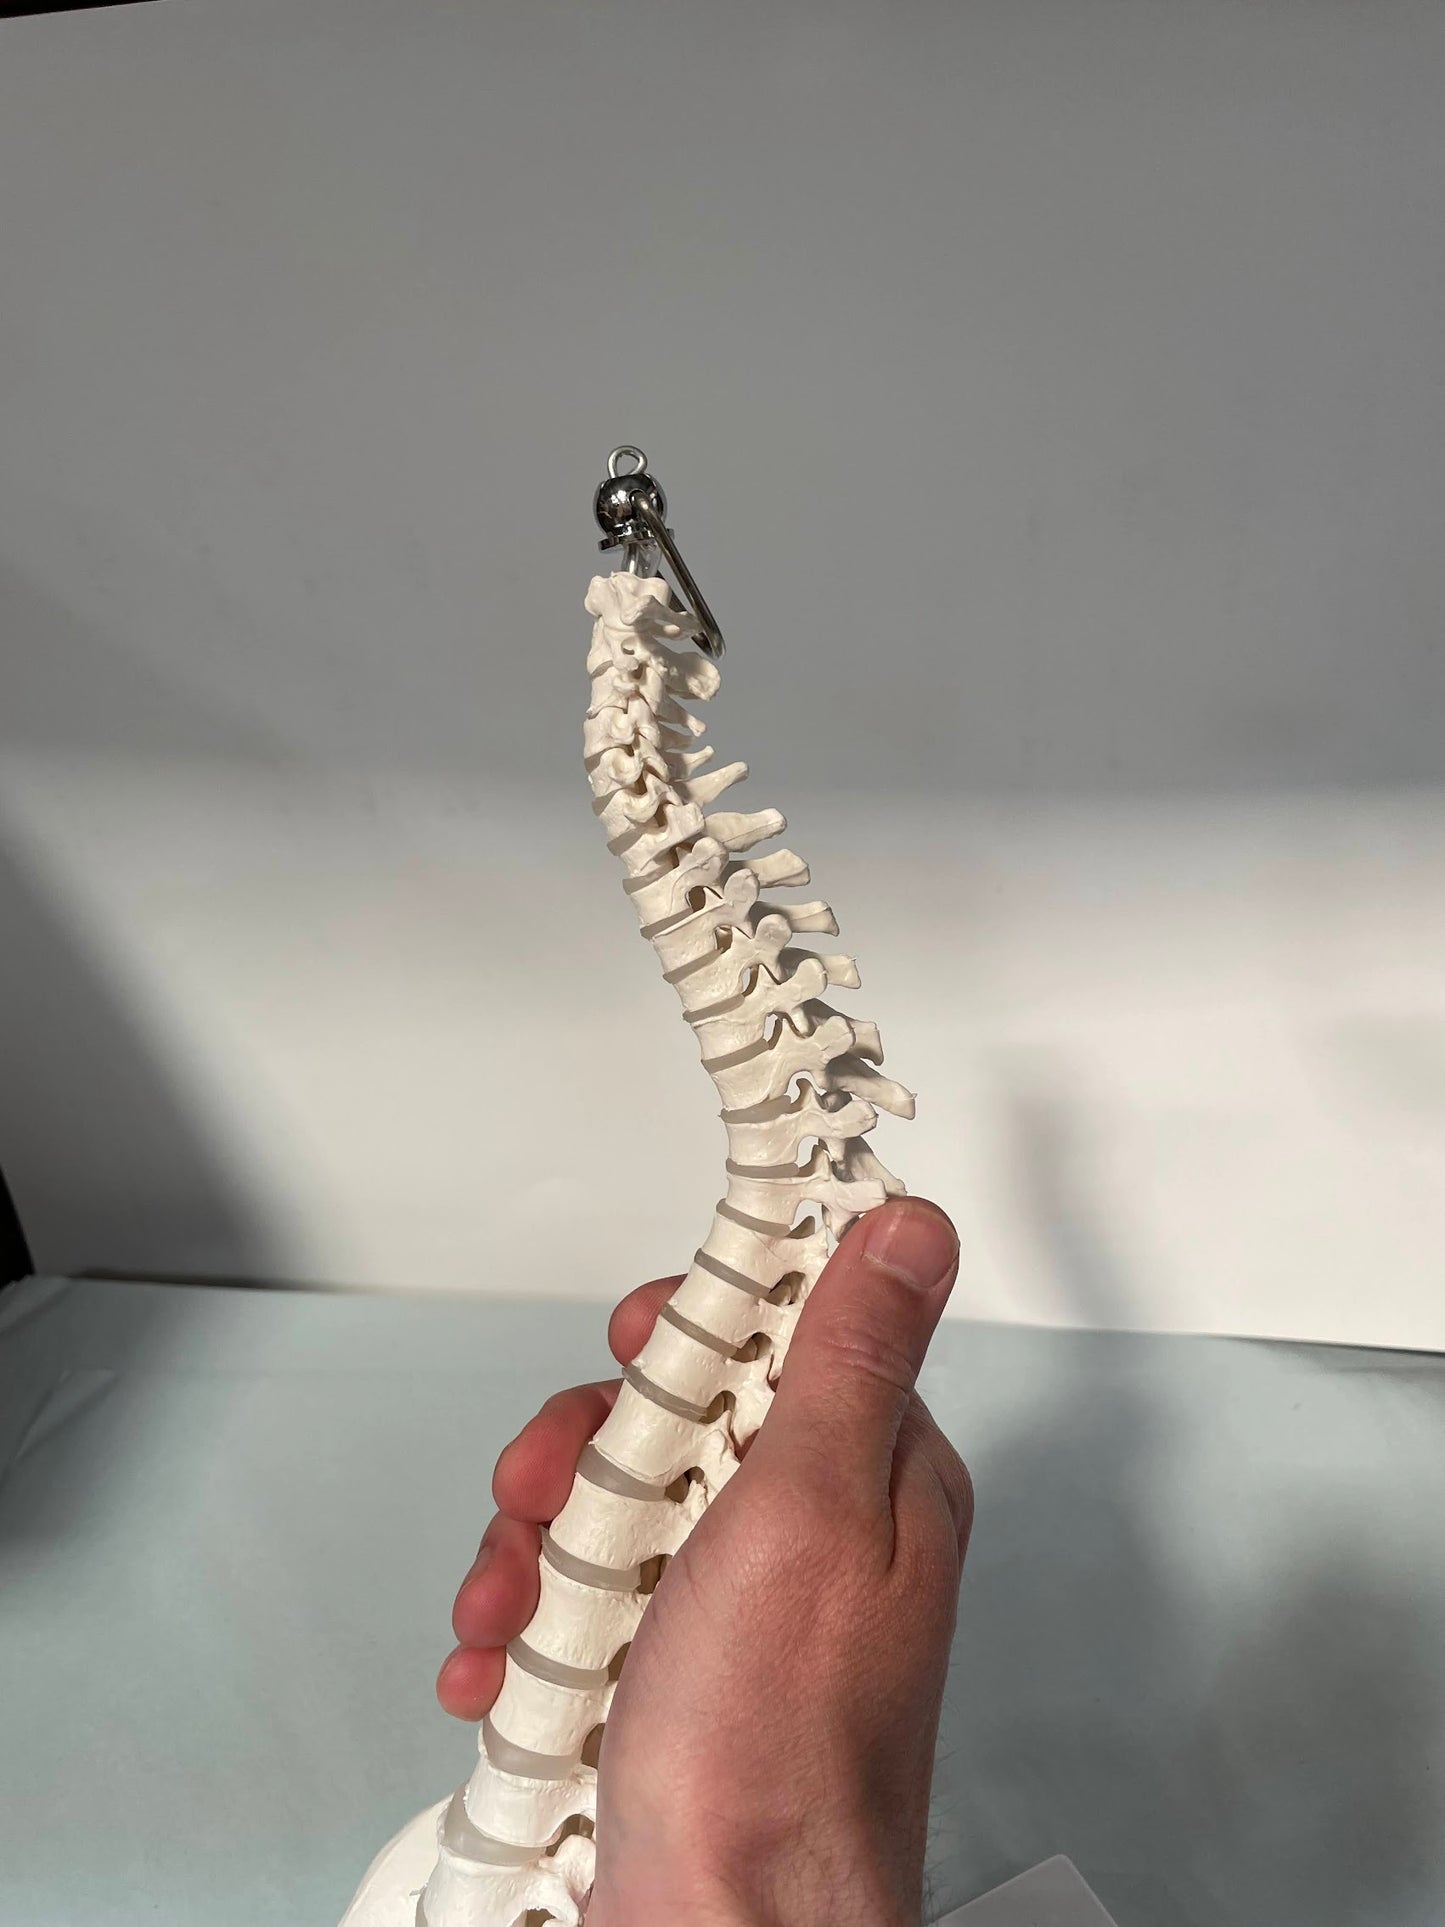 Reduced model of the spine presented on a stand